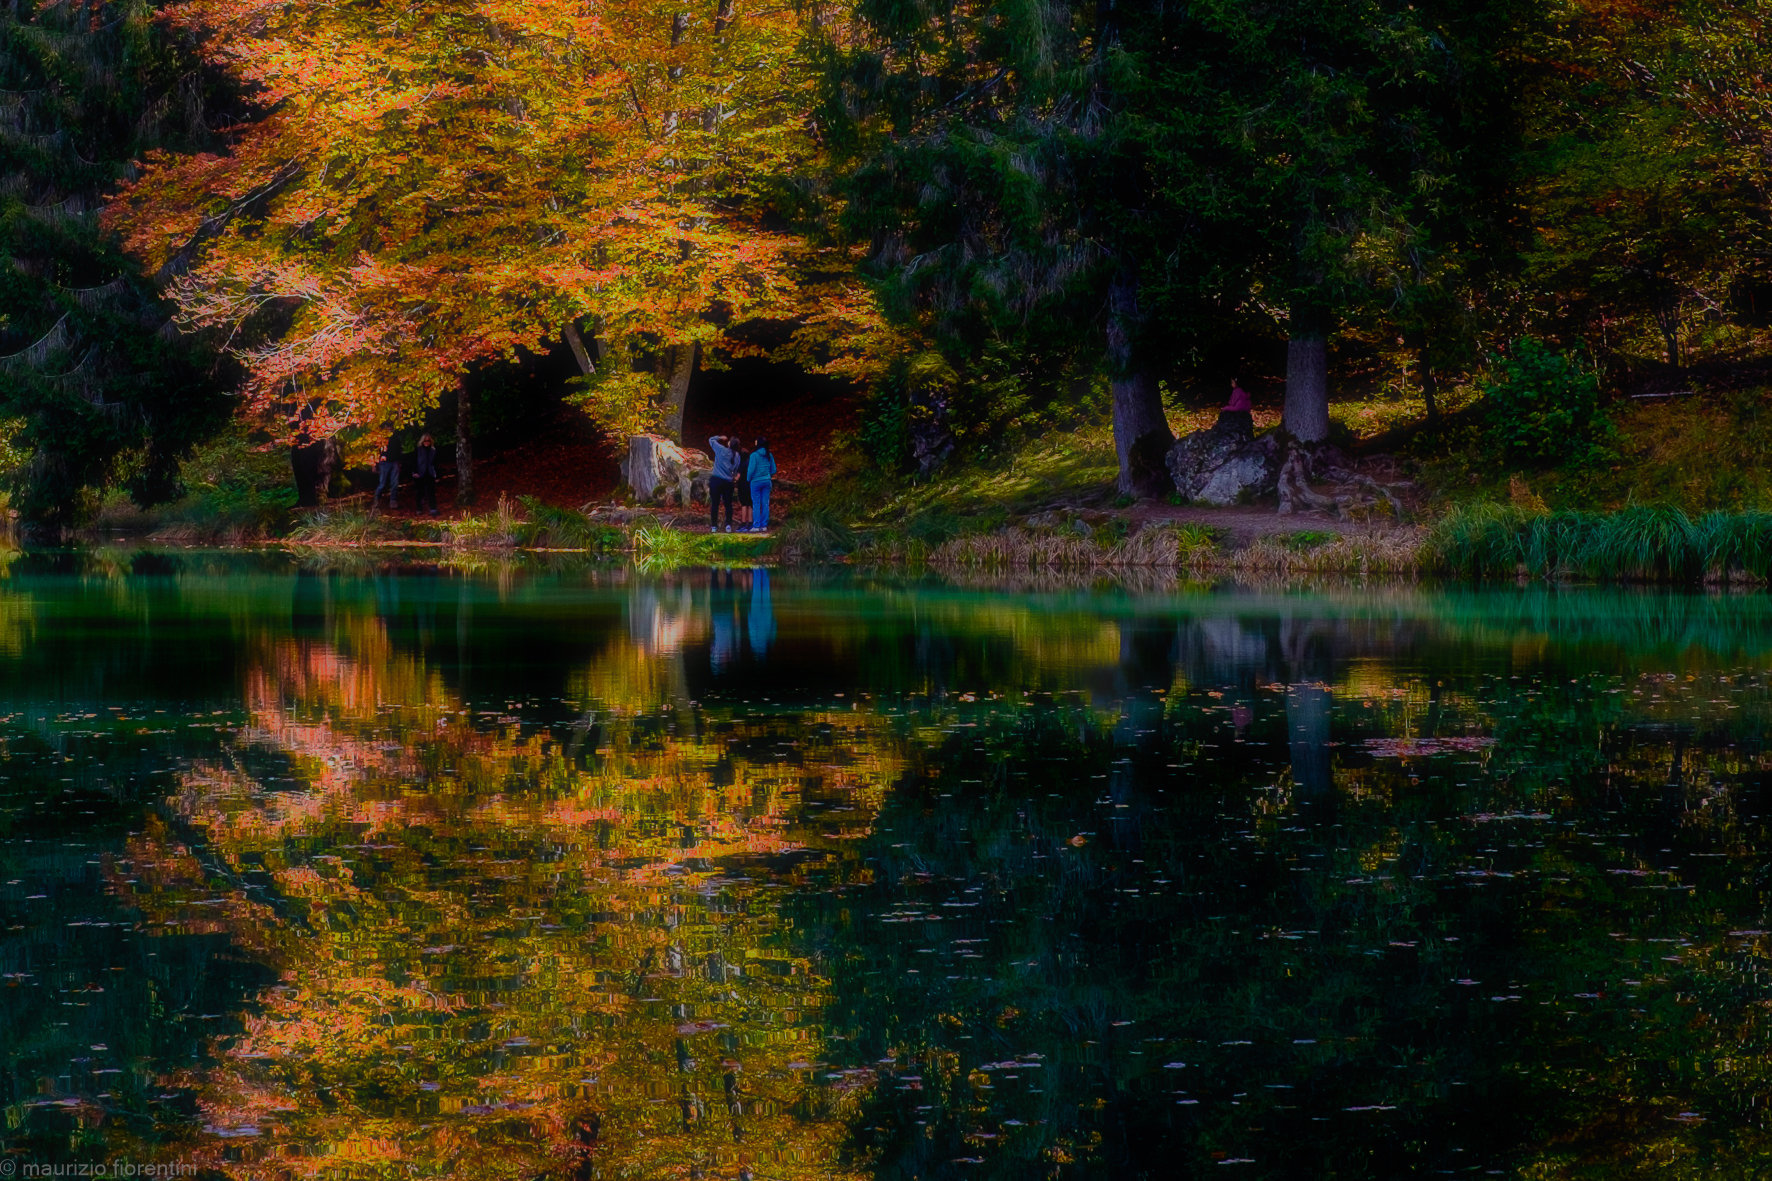 Autumn at the Welsperg Pond (Val Canali - TN)...